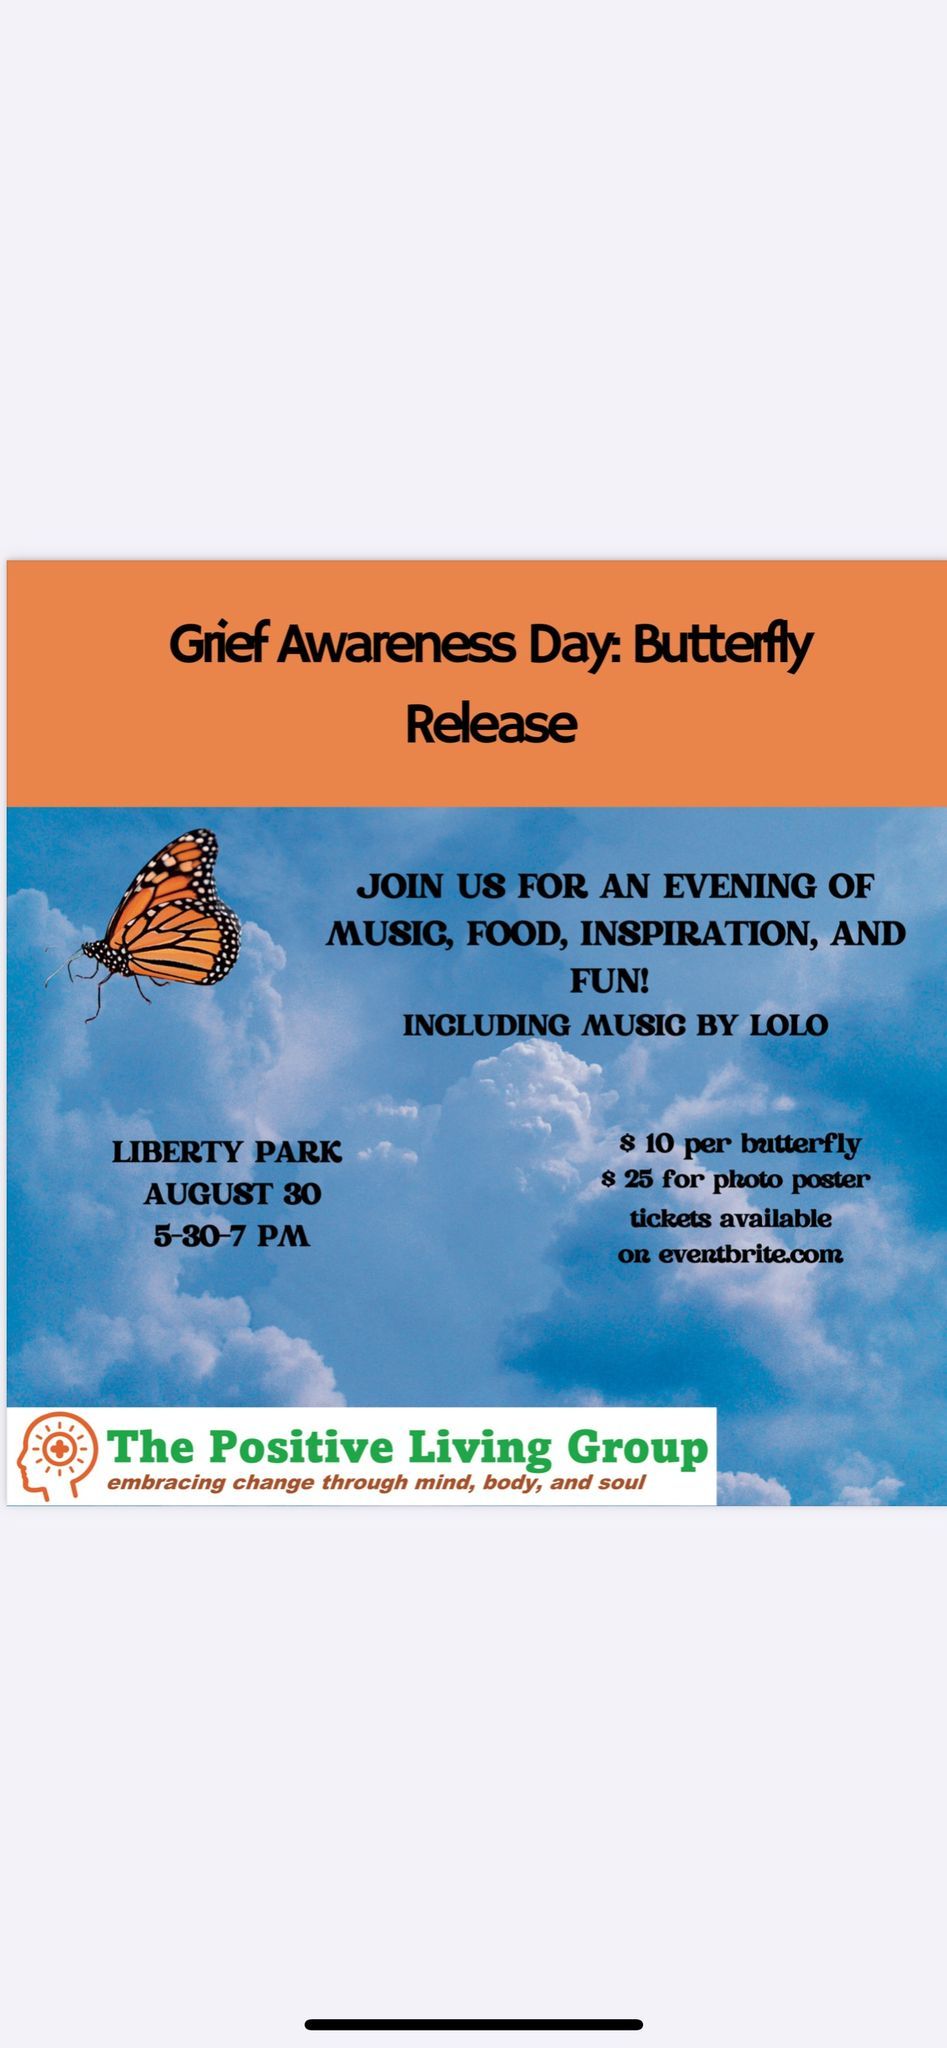 Grief Awareness Day: Butterfly Release 